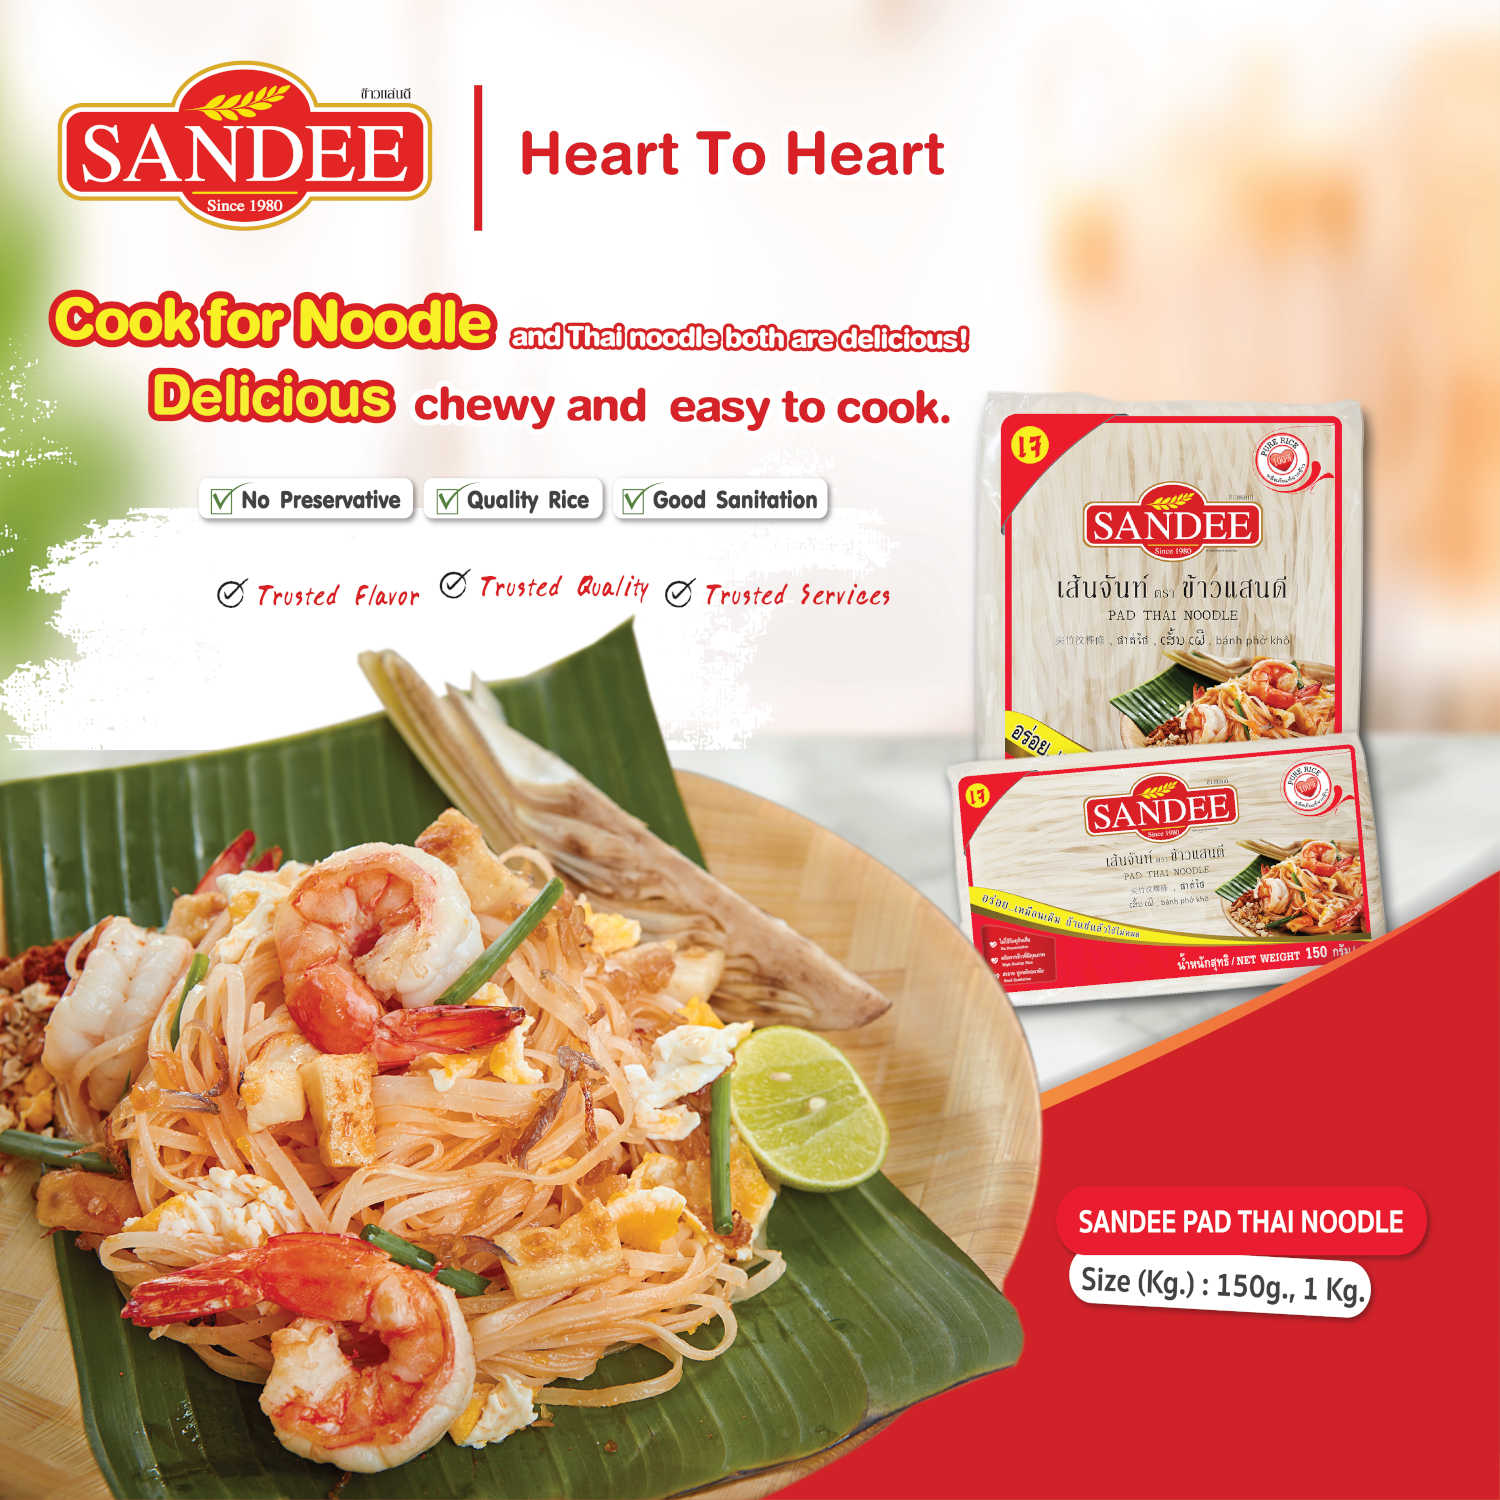 Sandee Products